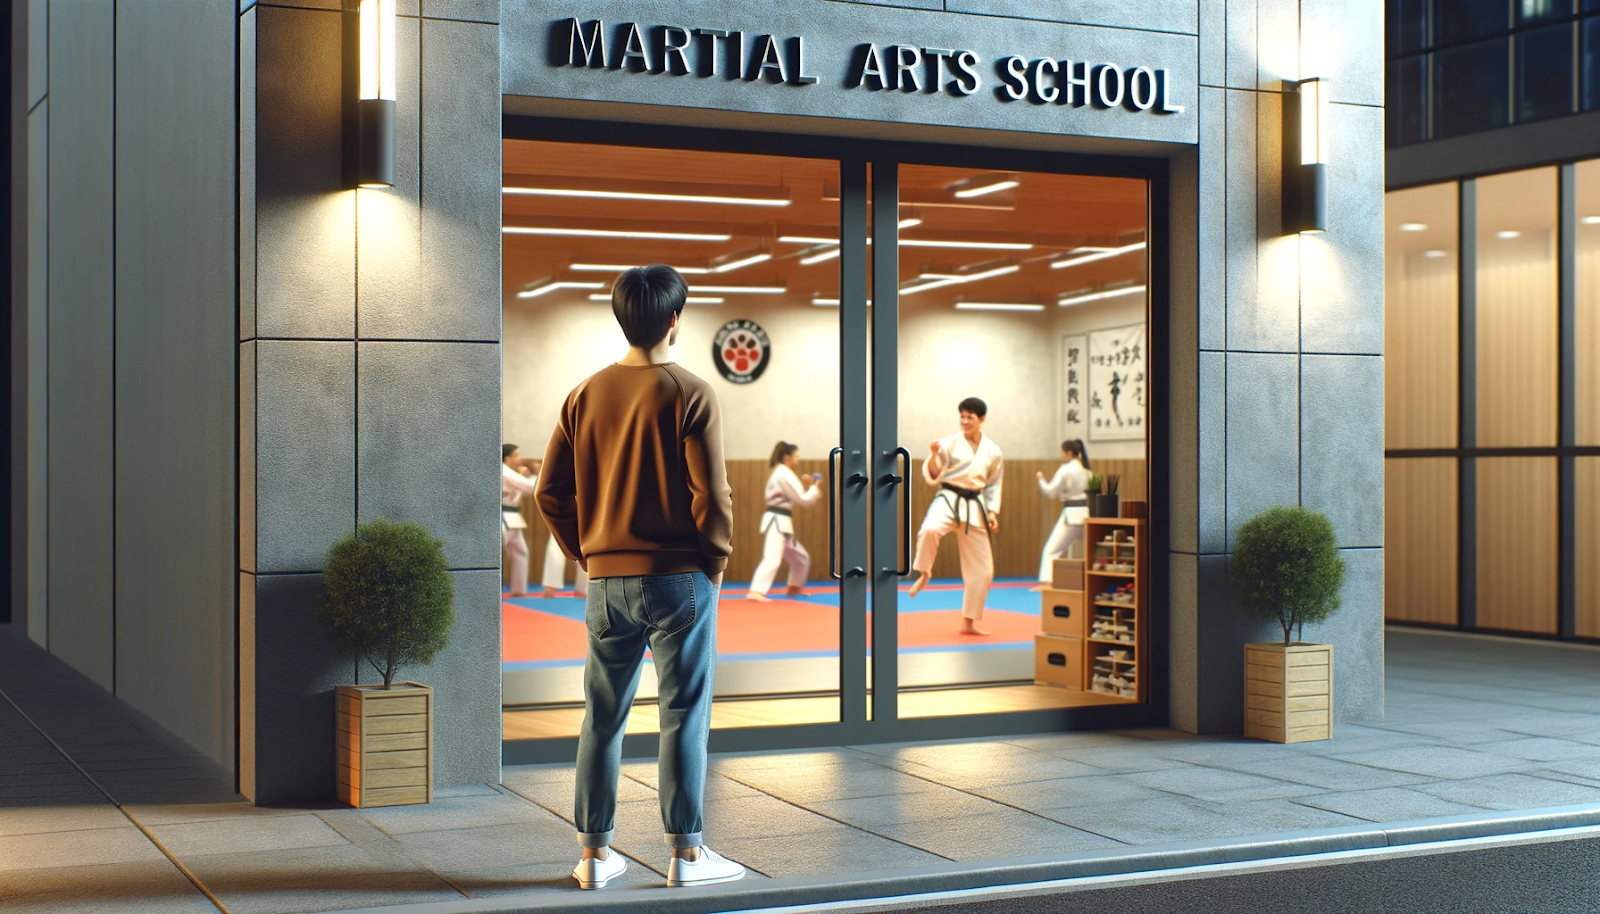 I've created the image showing a potential student standing outside a martial arts school, looking in through a large window without any text or signage. The scene conveys an inviting and aspirational atmosphere, highlighting the allure of joining the school.